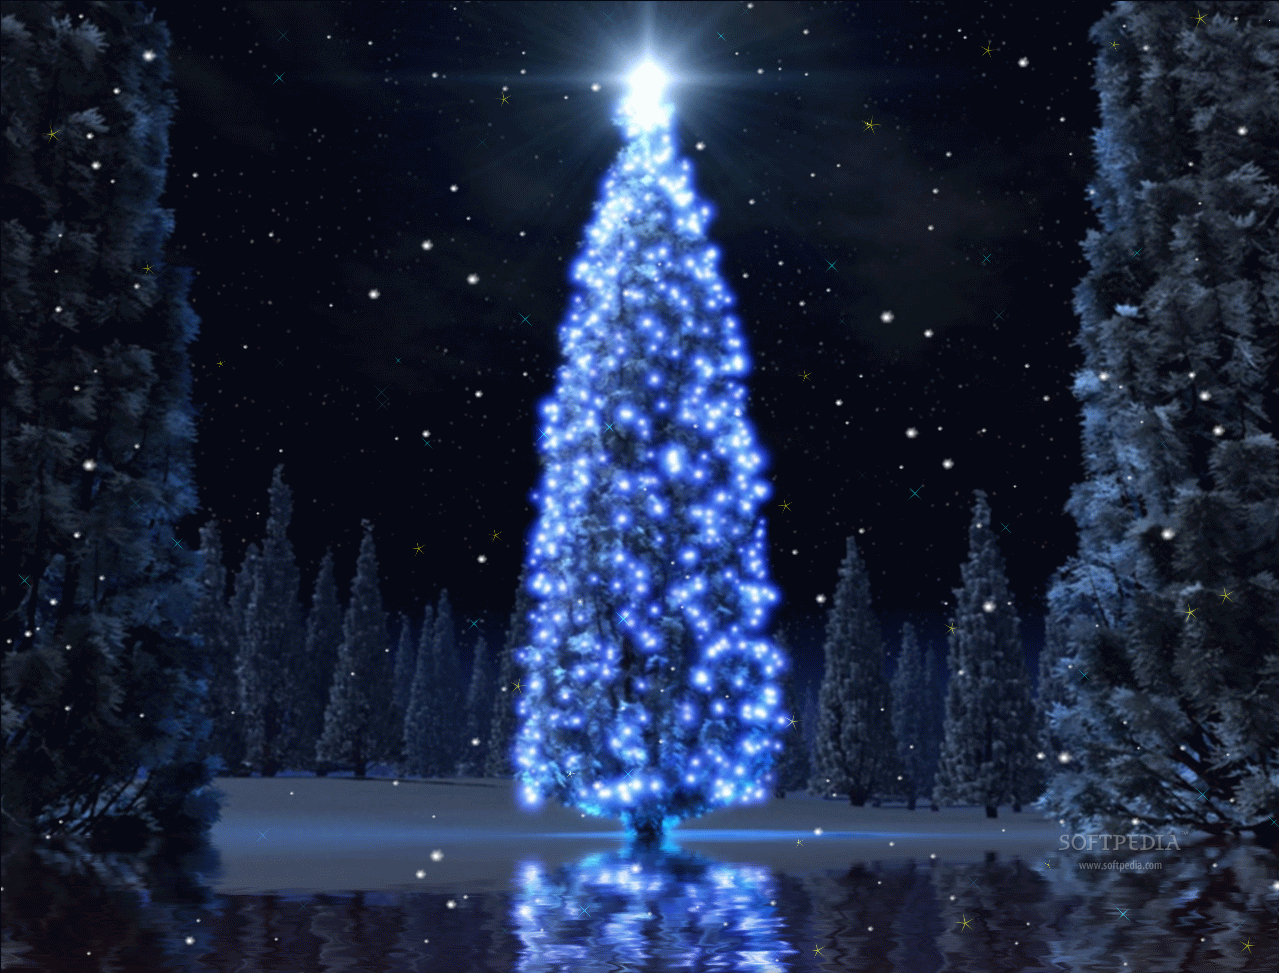 You are viewing the 3D Animated Christmas wallpaper in the category of Eve